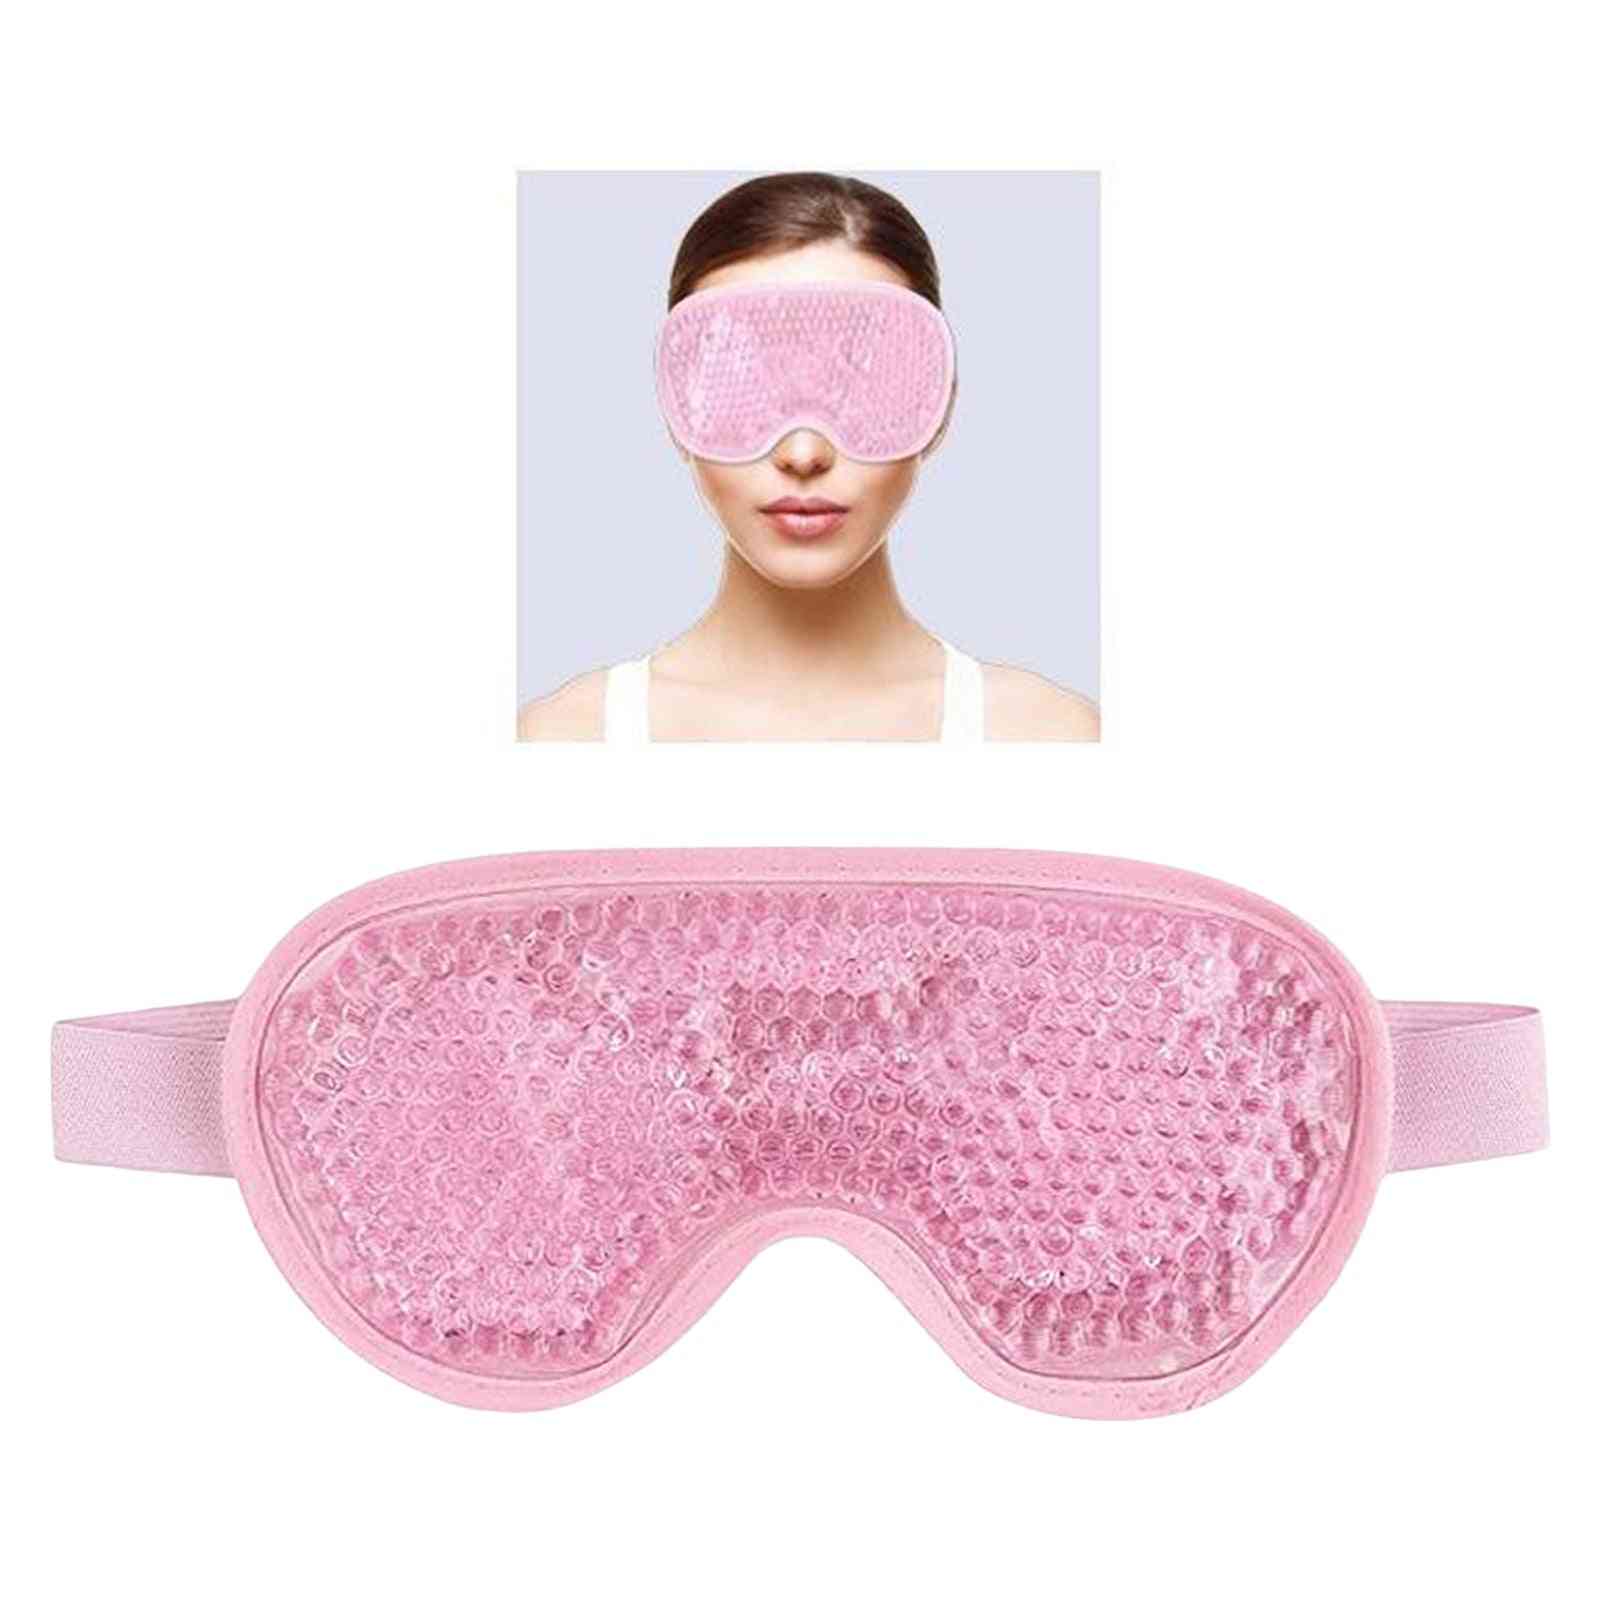 Hot Cold Gel Cooling Ice Eye Mask Reduces Eye Puffiness